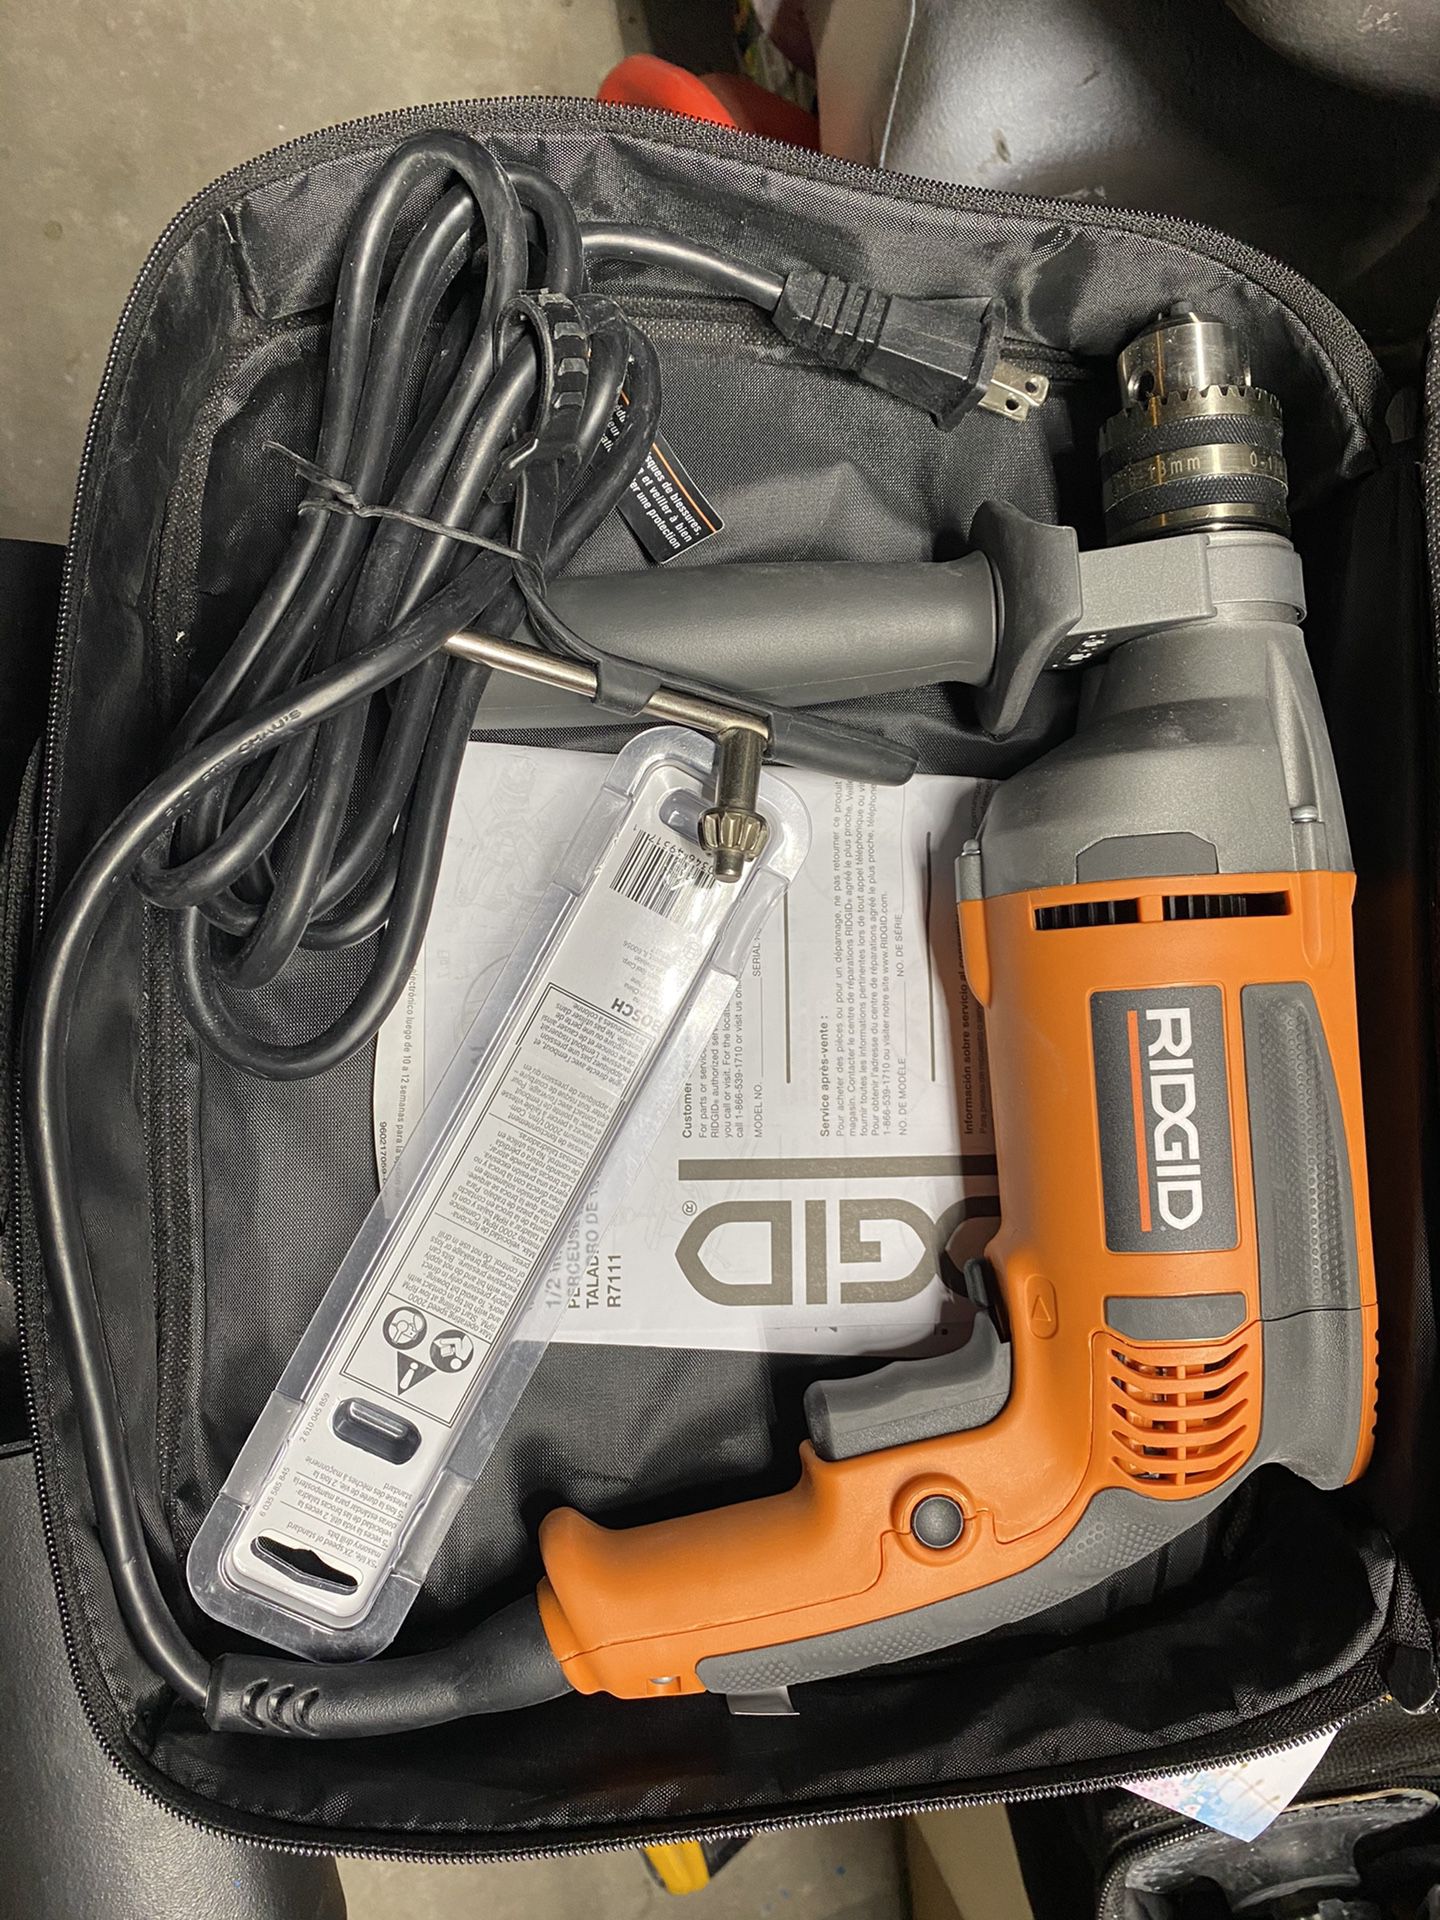 Hammer drill/drill brand new with case/bag